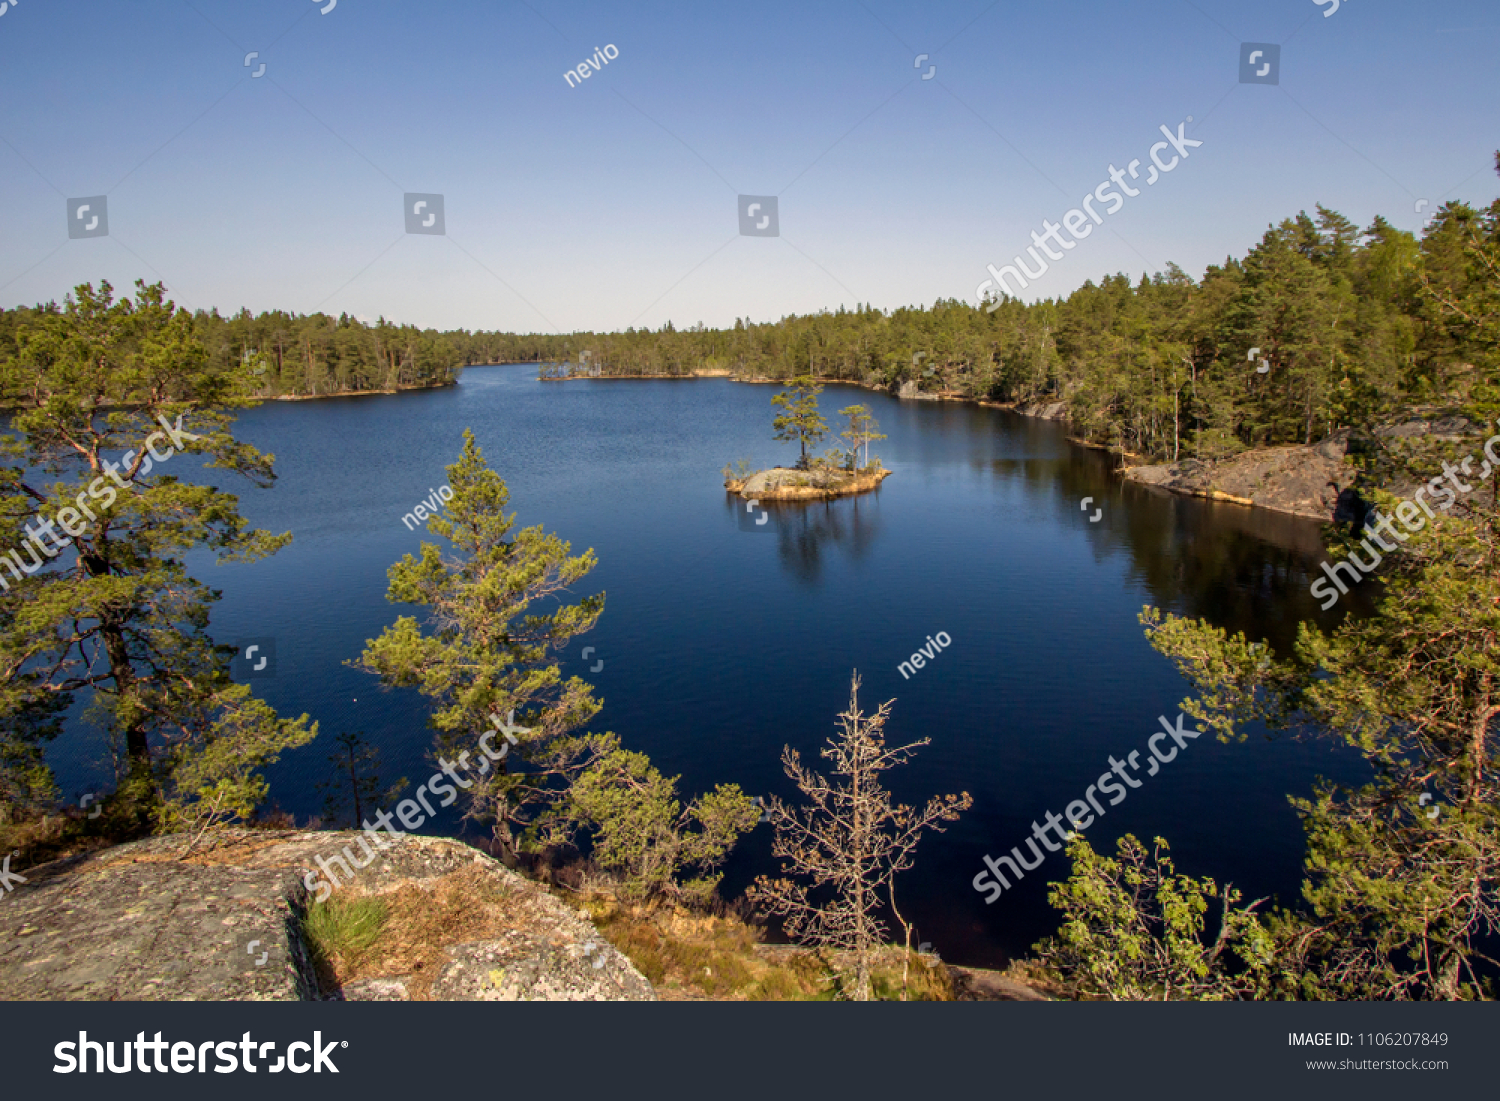 Tyresta By National Park close to Stockholm city #1106207849